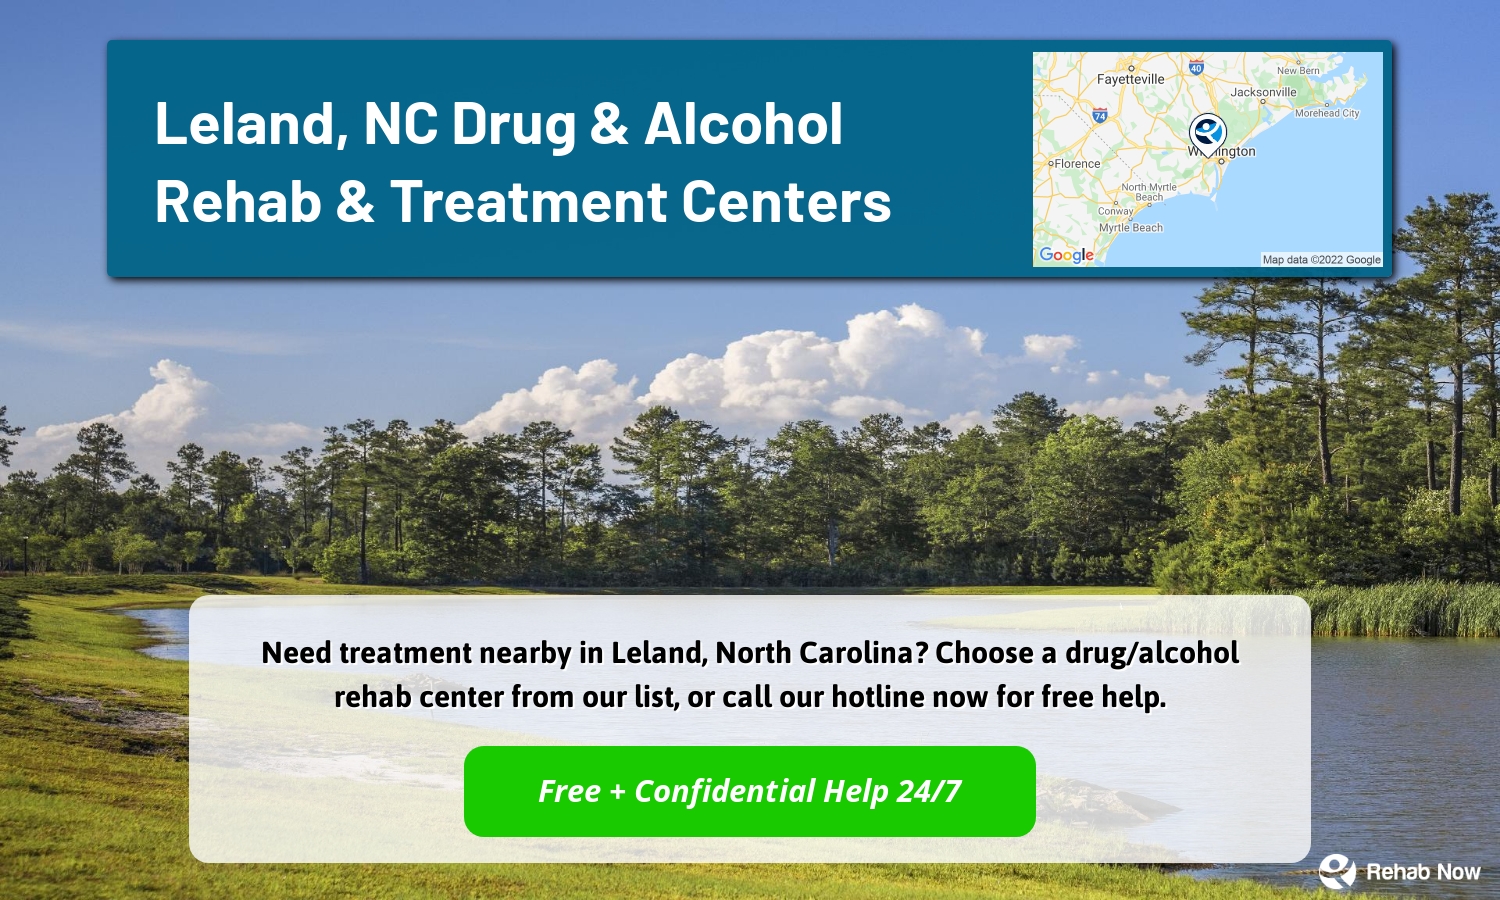 Need treatment nearby in Leland, North Carolina? Choose a drug/alcohol rehab center from our list, or call our hotline now for free help.